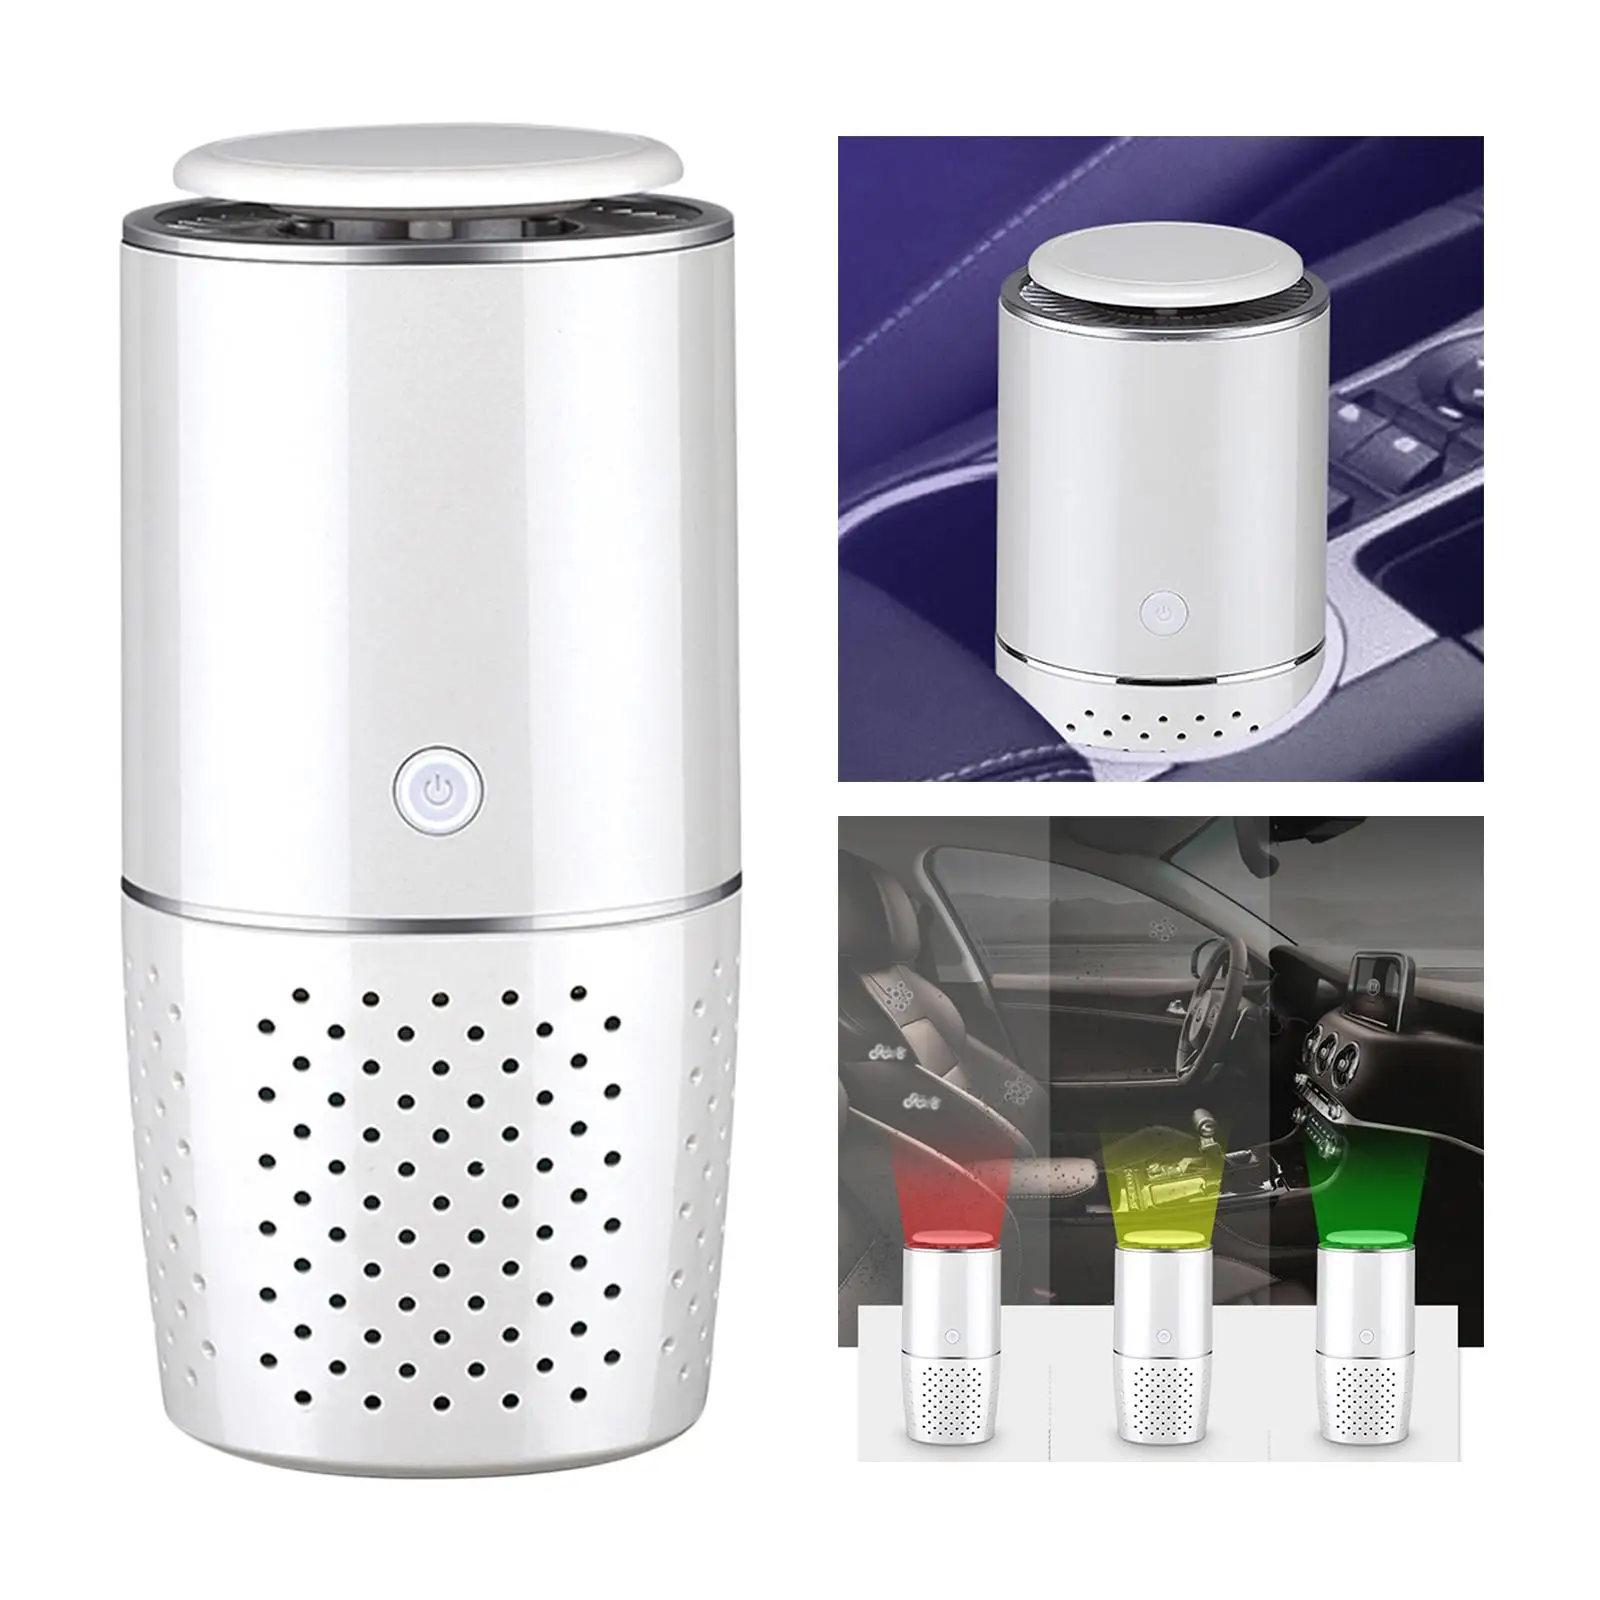  & Mini HEPA  with 3-Stage Filtration  for Car & Office, Eliminates Smoke, Dust, Pollen, Low Noise and USB Powered